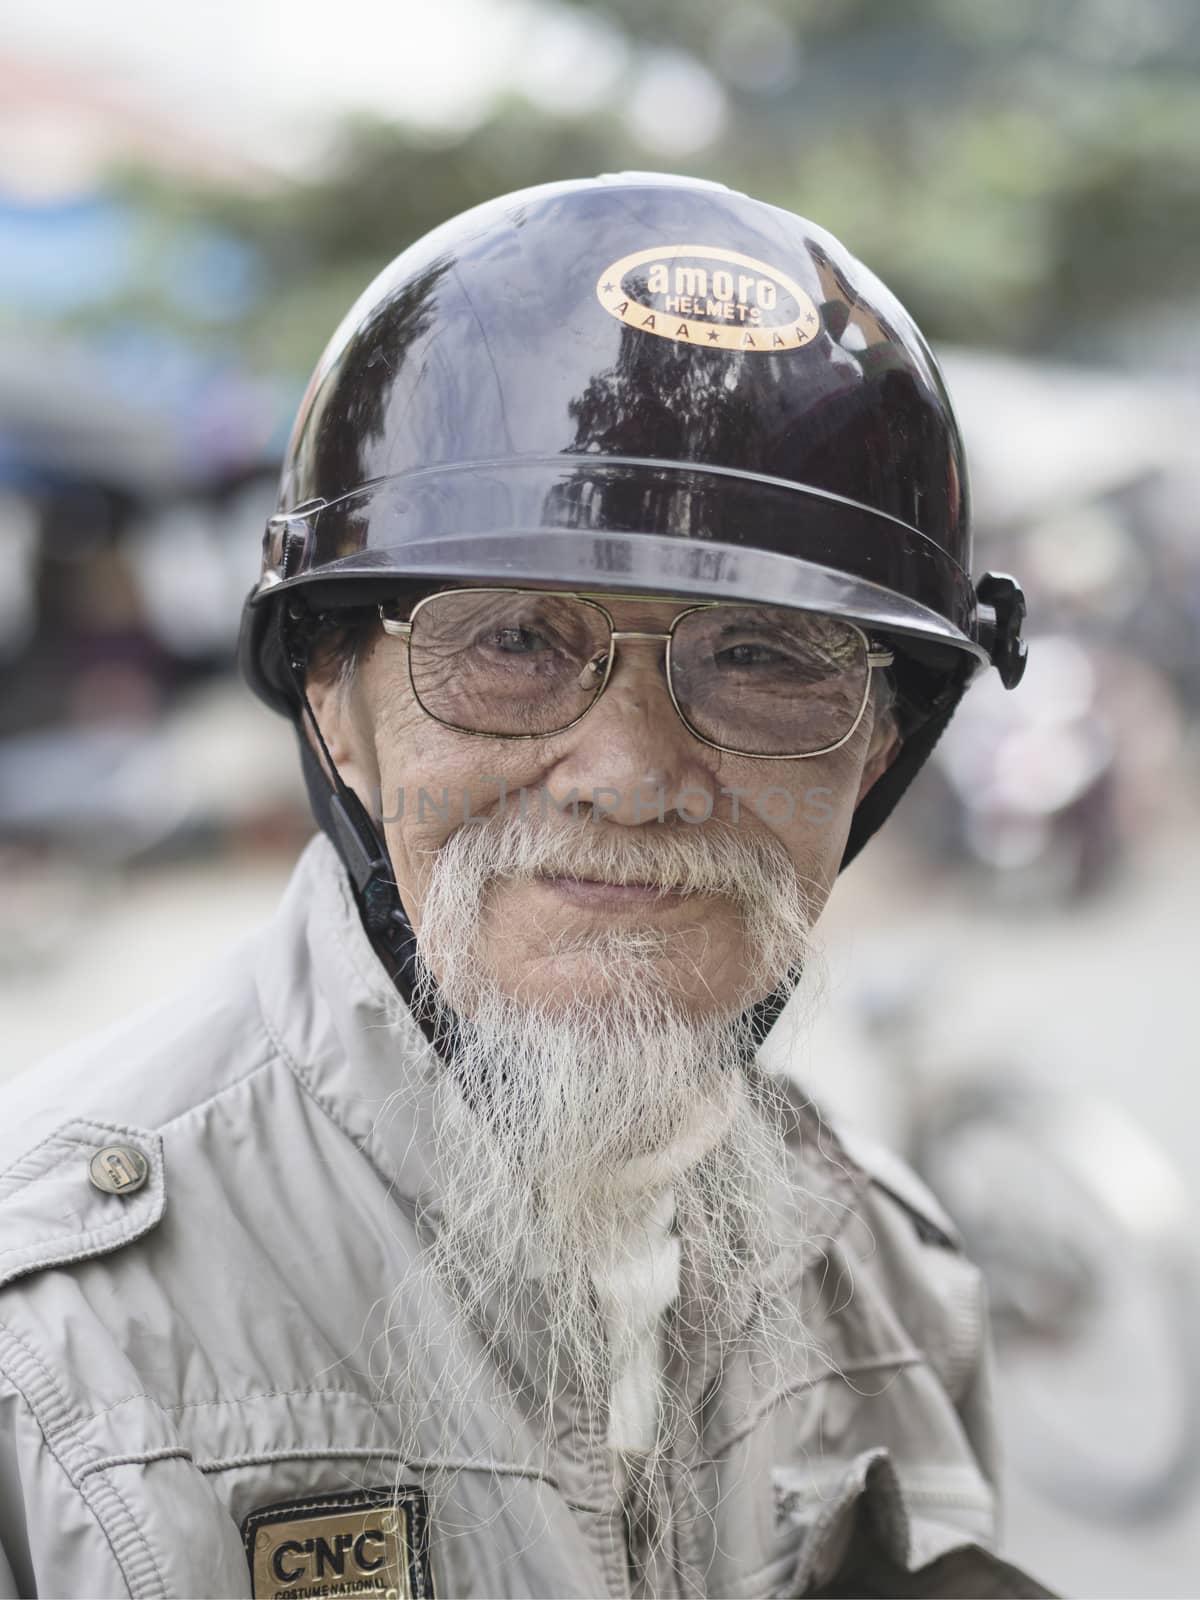 Hoi An, Vietnam - Dec 28, 2016: Portrait of an old biker in Hoi An who keeps his goatee like his hero Ho Chi Minh.